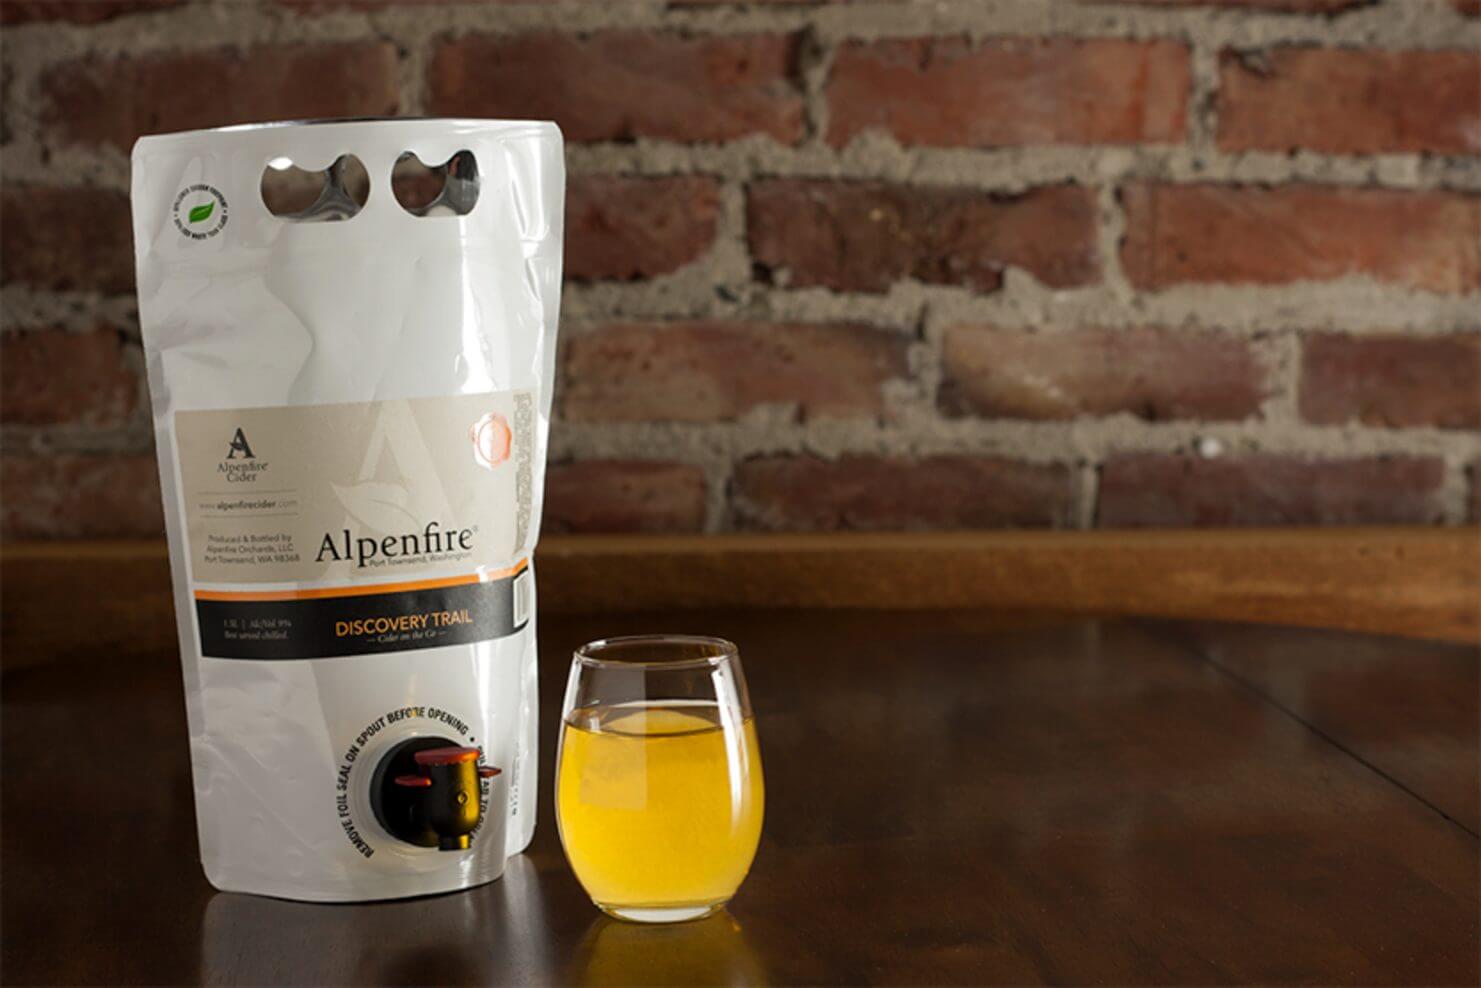 Alpenfire Cider Releases Discovery Trail “Cider on the Go” in Collaboration with the Olympic Discovery Trail